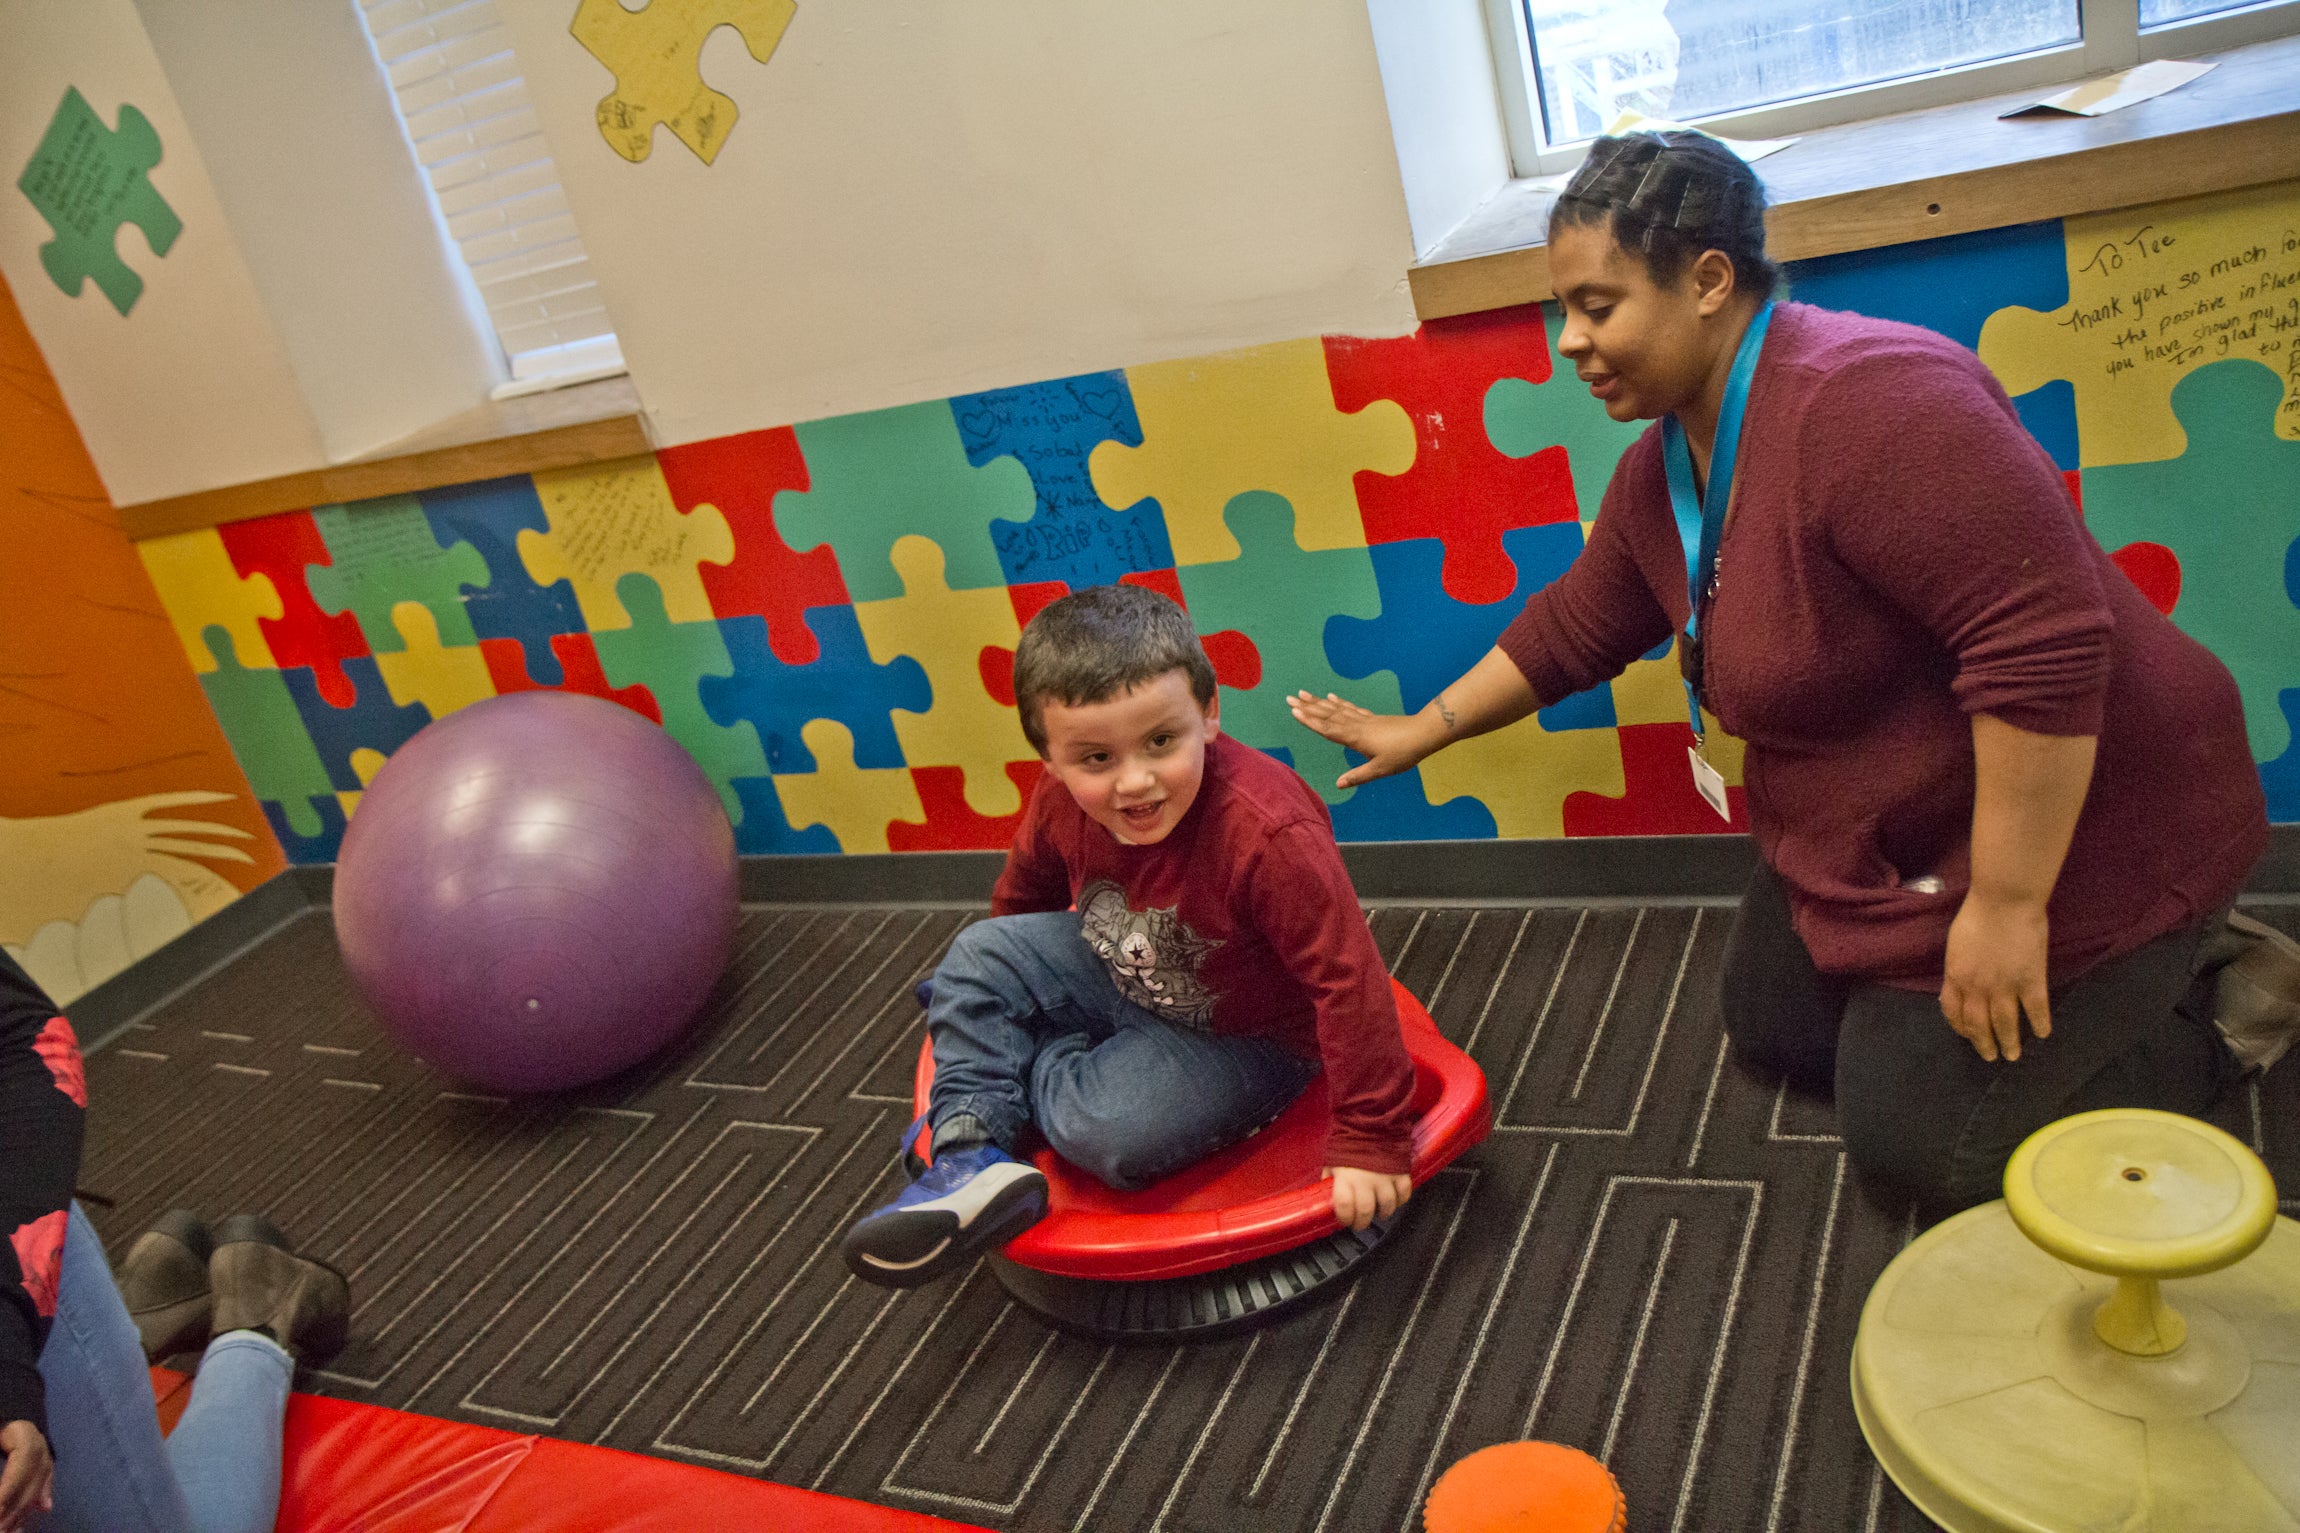 finding-day-care-that-accommodates-children-with-autism-whyy